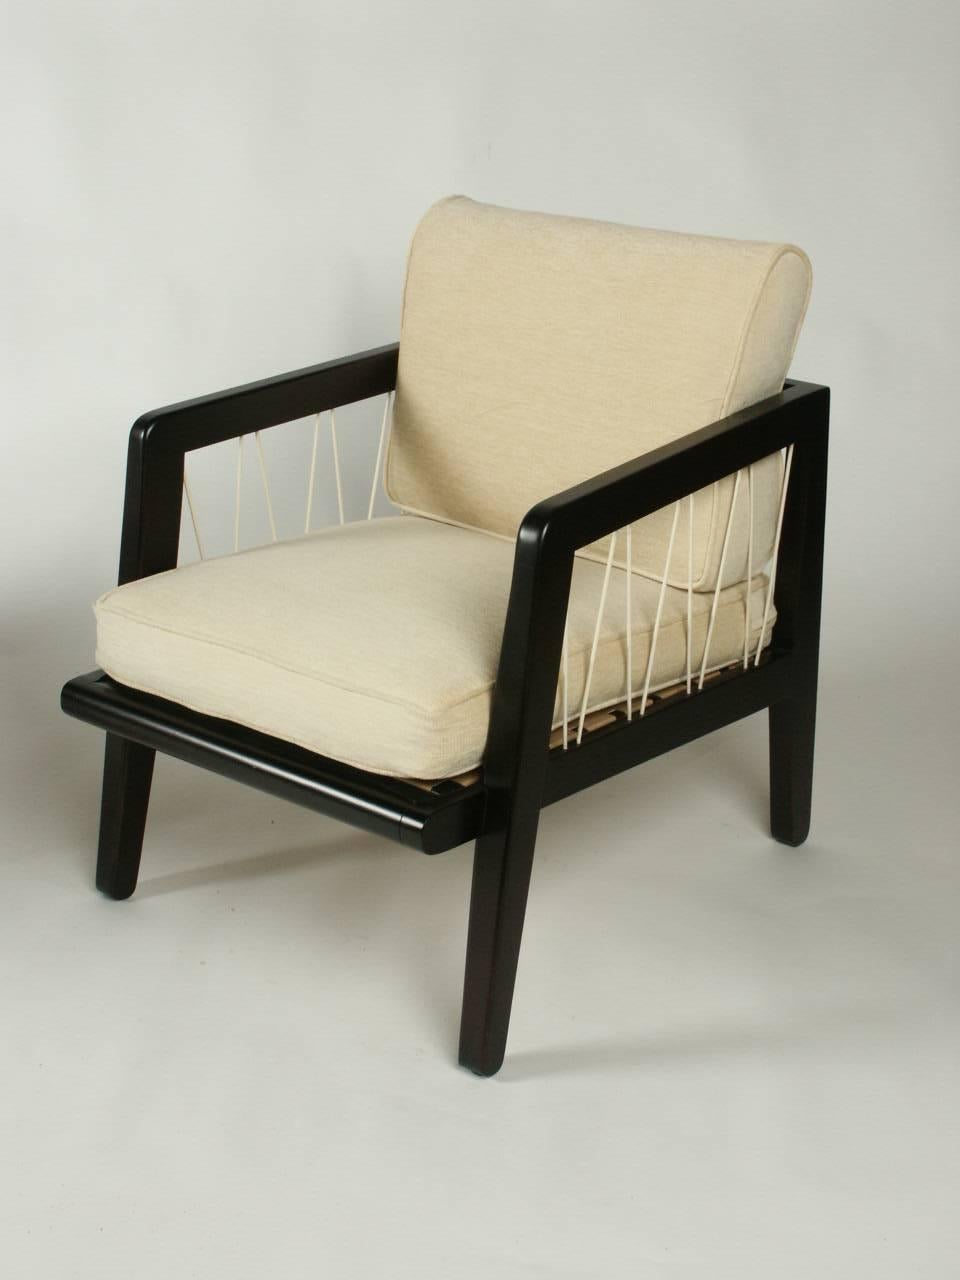 Pair of Edward Wormley Precedent collection for Drexel lounge chairs, circa 1947, dark espresso stain on silver elm with woven nylon cording that zig zags between frame arm and seat. COM as this set shown is sold. This line was designed while